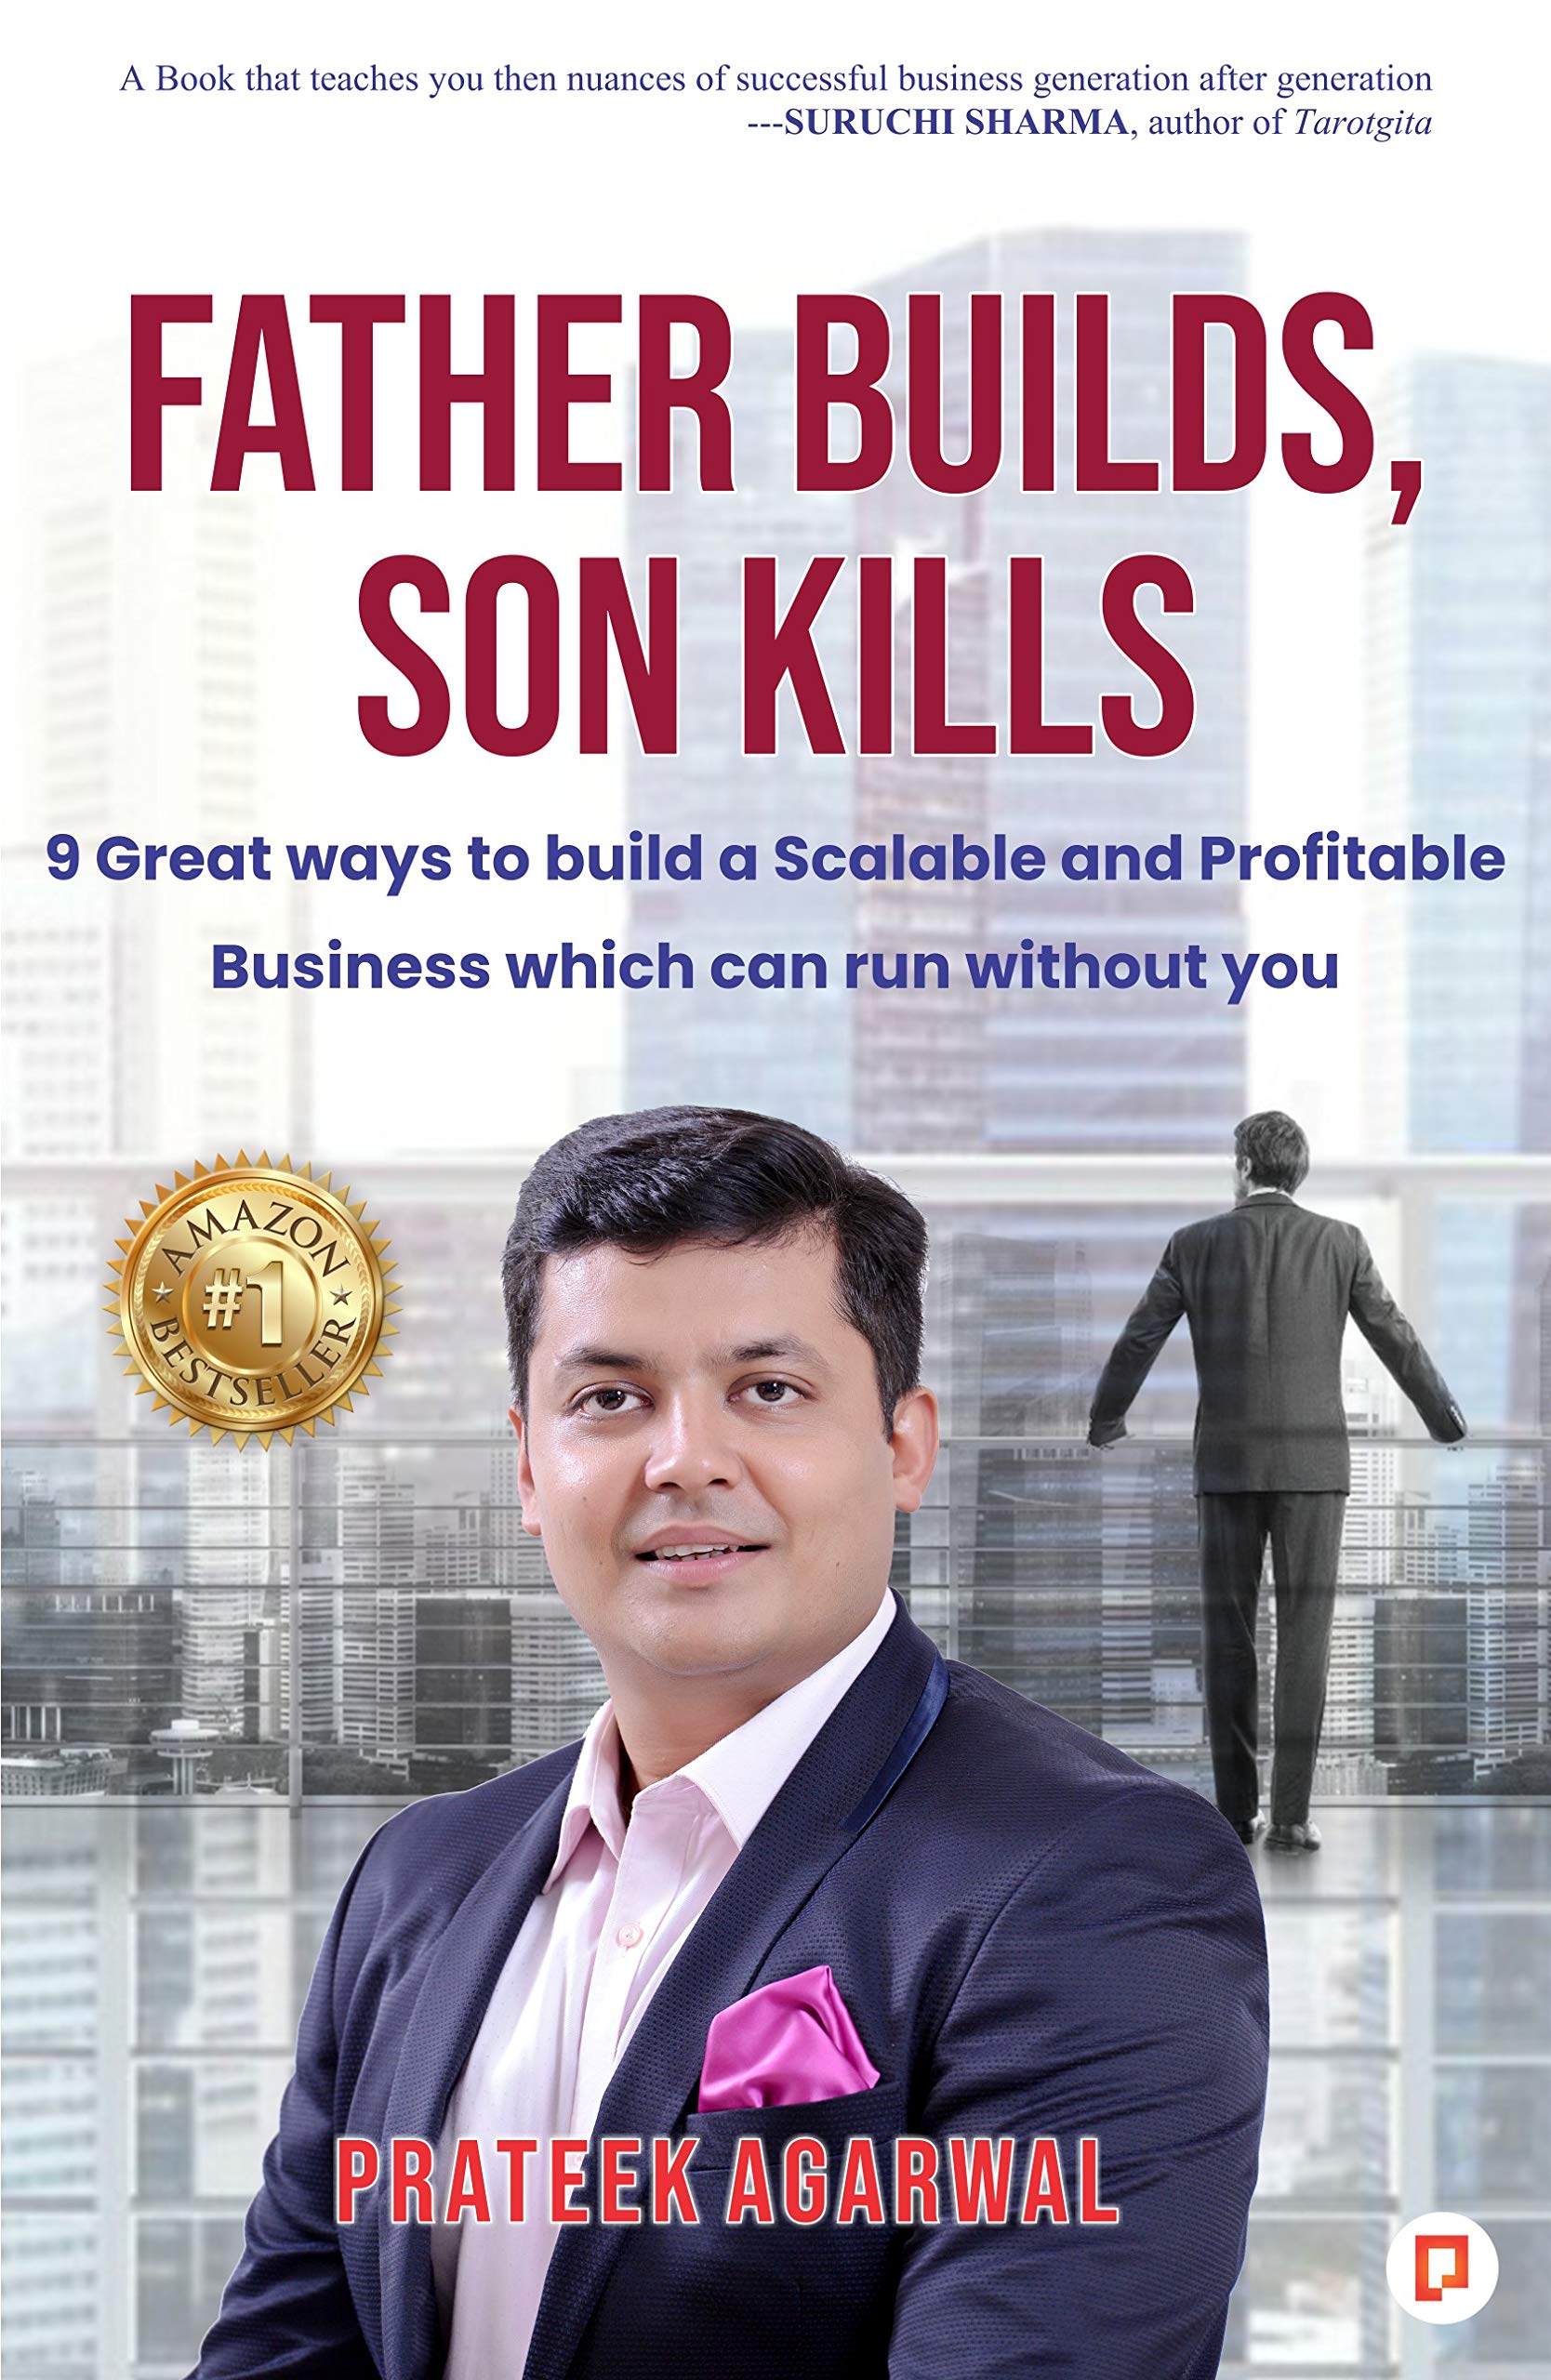 LATEST FATHER BUILDS, SON KILLS: 9 Great Ways to Build a Scalable and Profitable Business which Can Run Without You